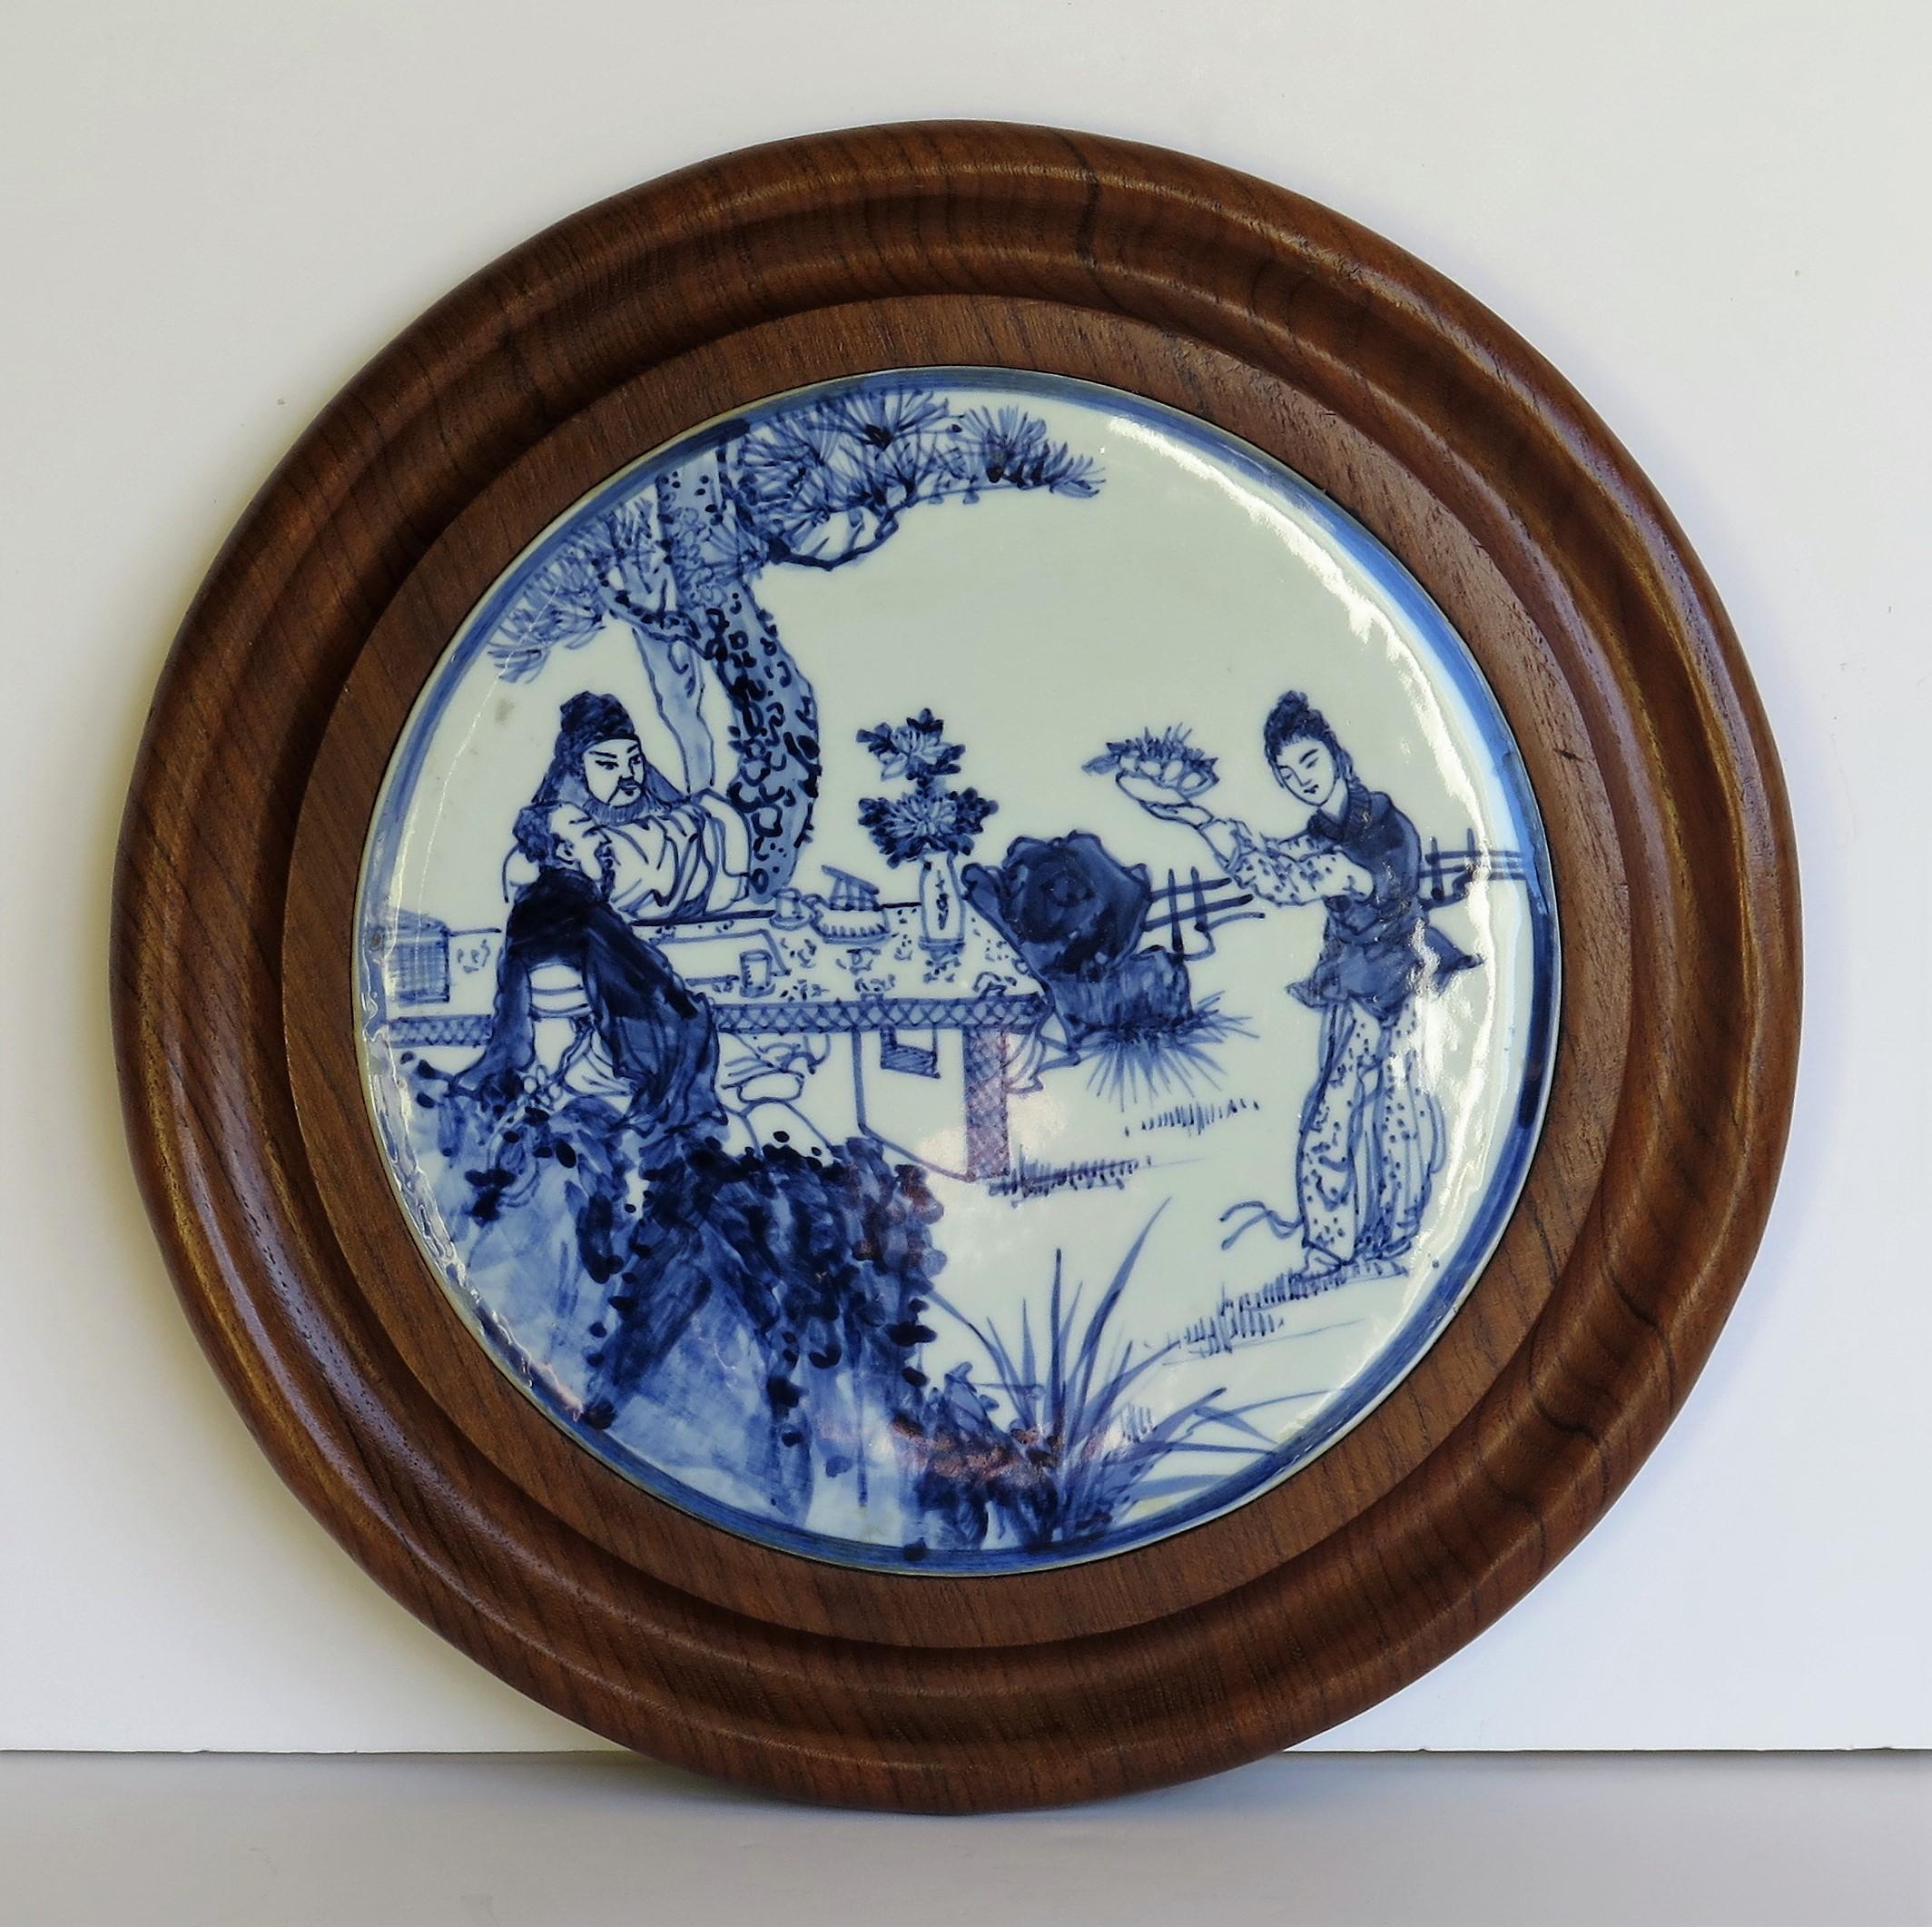 This is Chinese Export blue and white porcelain hand painted stand or picture in a turned walnut frame, dating to the early 20th century, circa 1930.

The central porcelain plaque is well potted with a glassy white glaze.

The porcelain has been